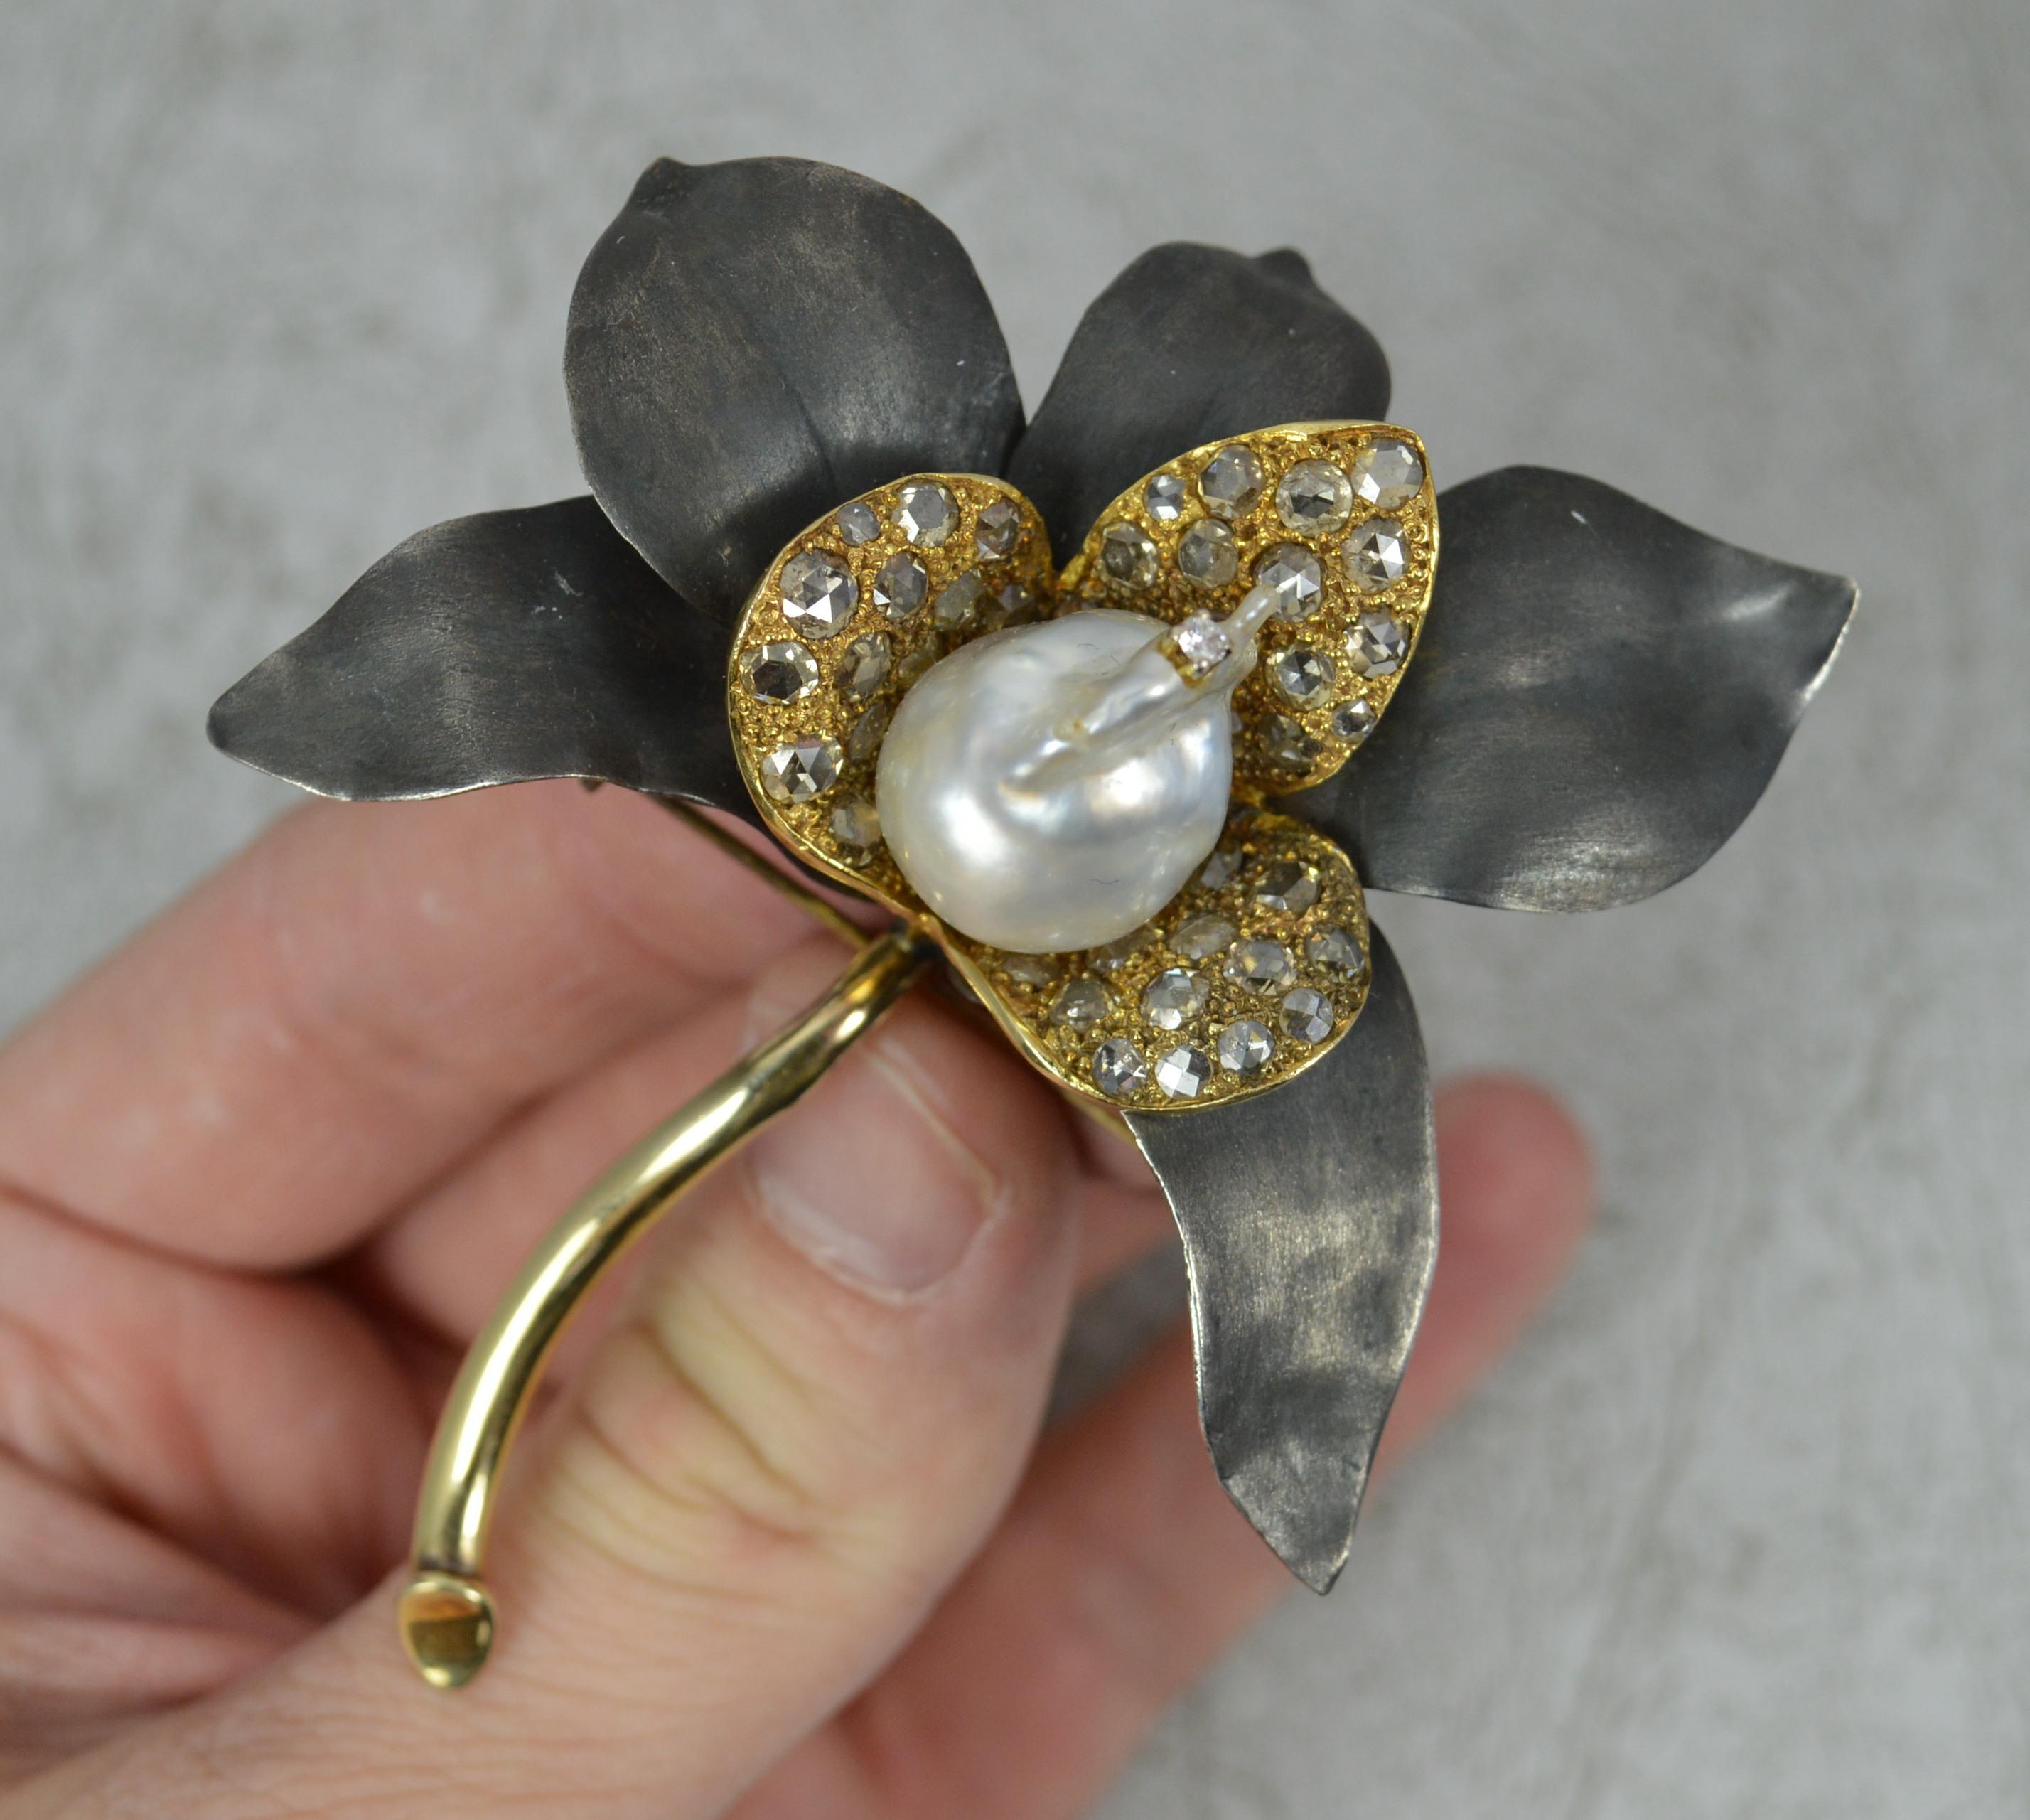 A superb flower shaped brooch.
Solid 14 carat yellow gold stem and oxidised silver petals.
Large free form pearl to centre with three petals set with a total of 42 natural diamonds. A spread of over 2.40 carats.
Circa 1920.
En tremblant